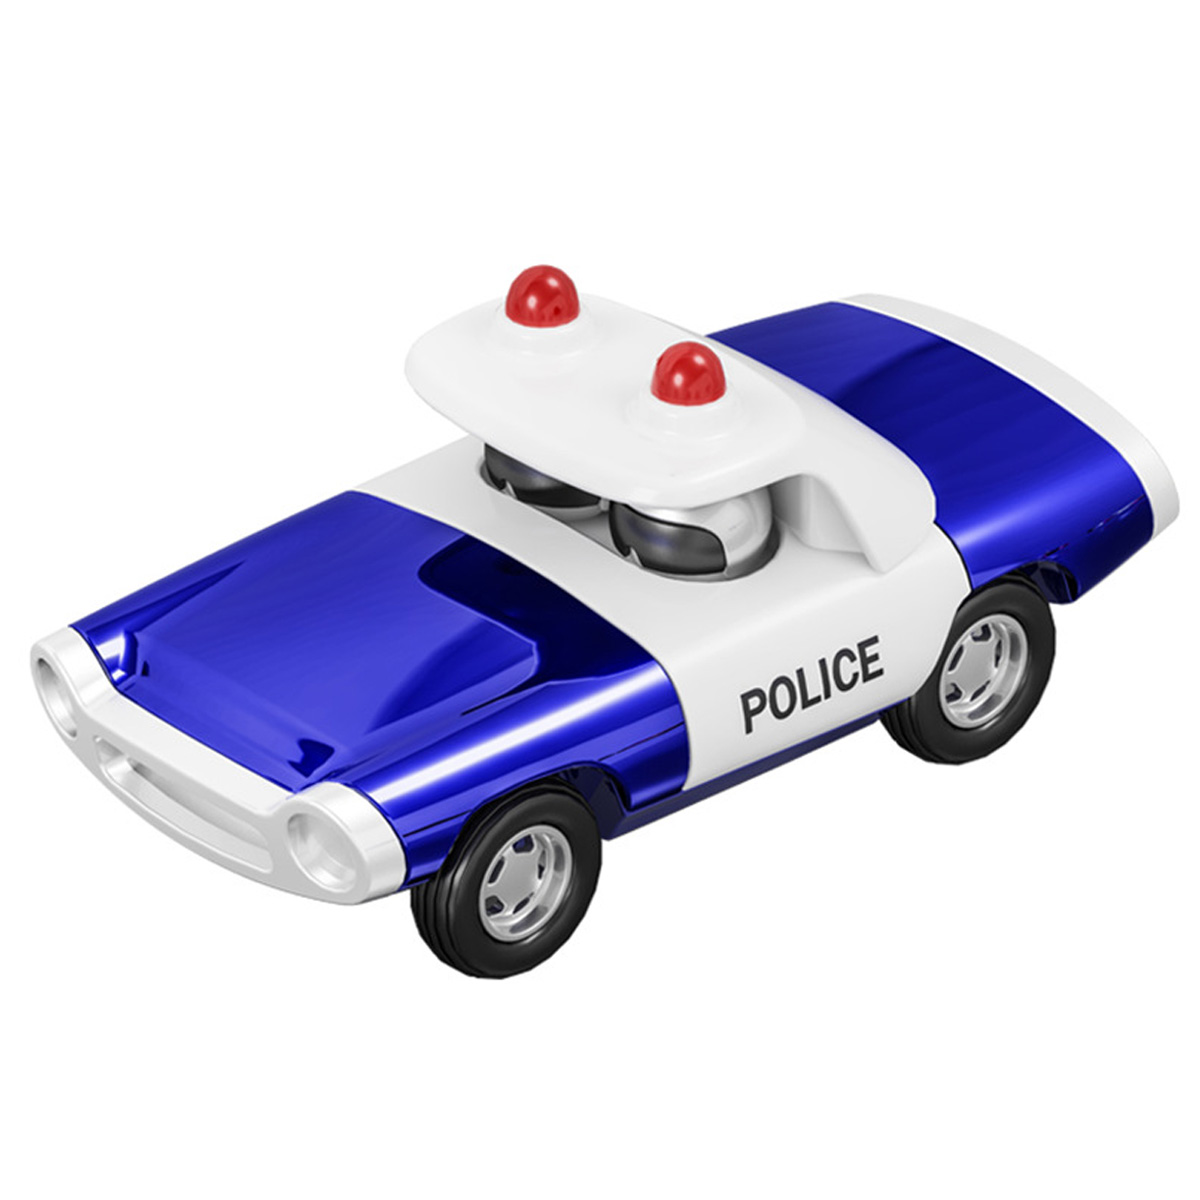 Alloy-Police-Pull-Back-Diecast-Car-Model-Toy-for-Gift-Collection-Home-Decoration-1734360-3